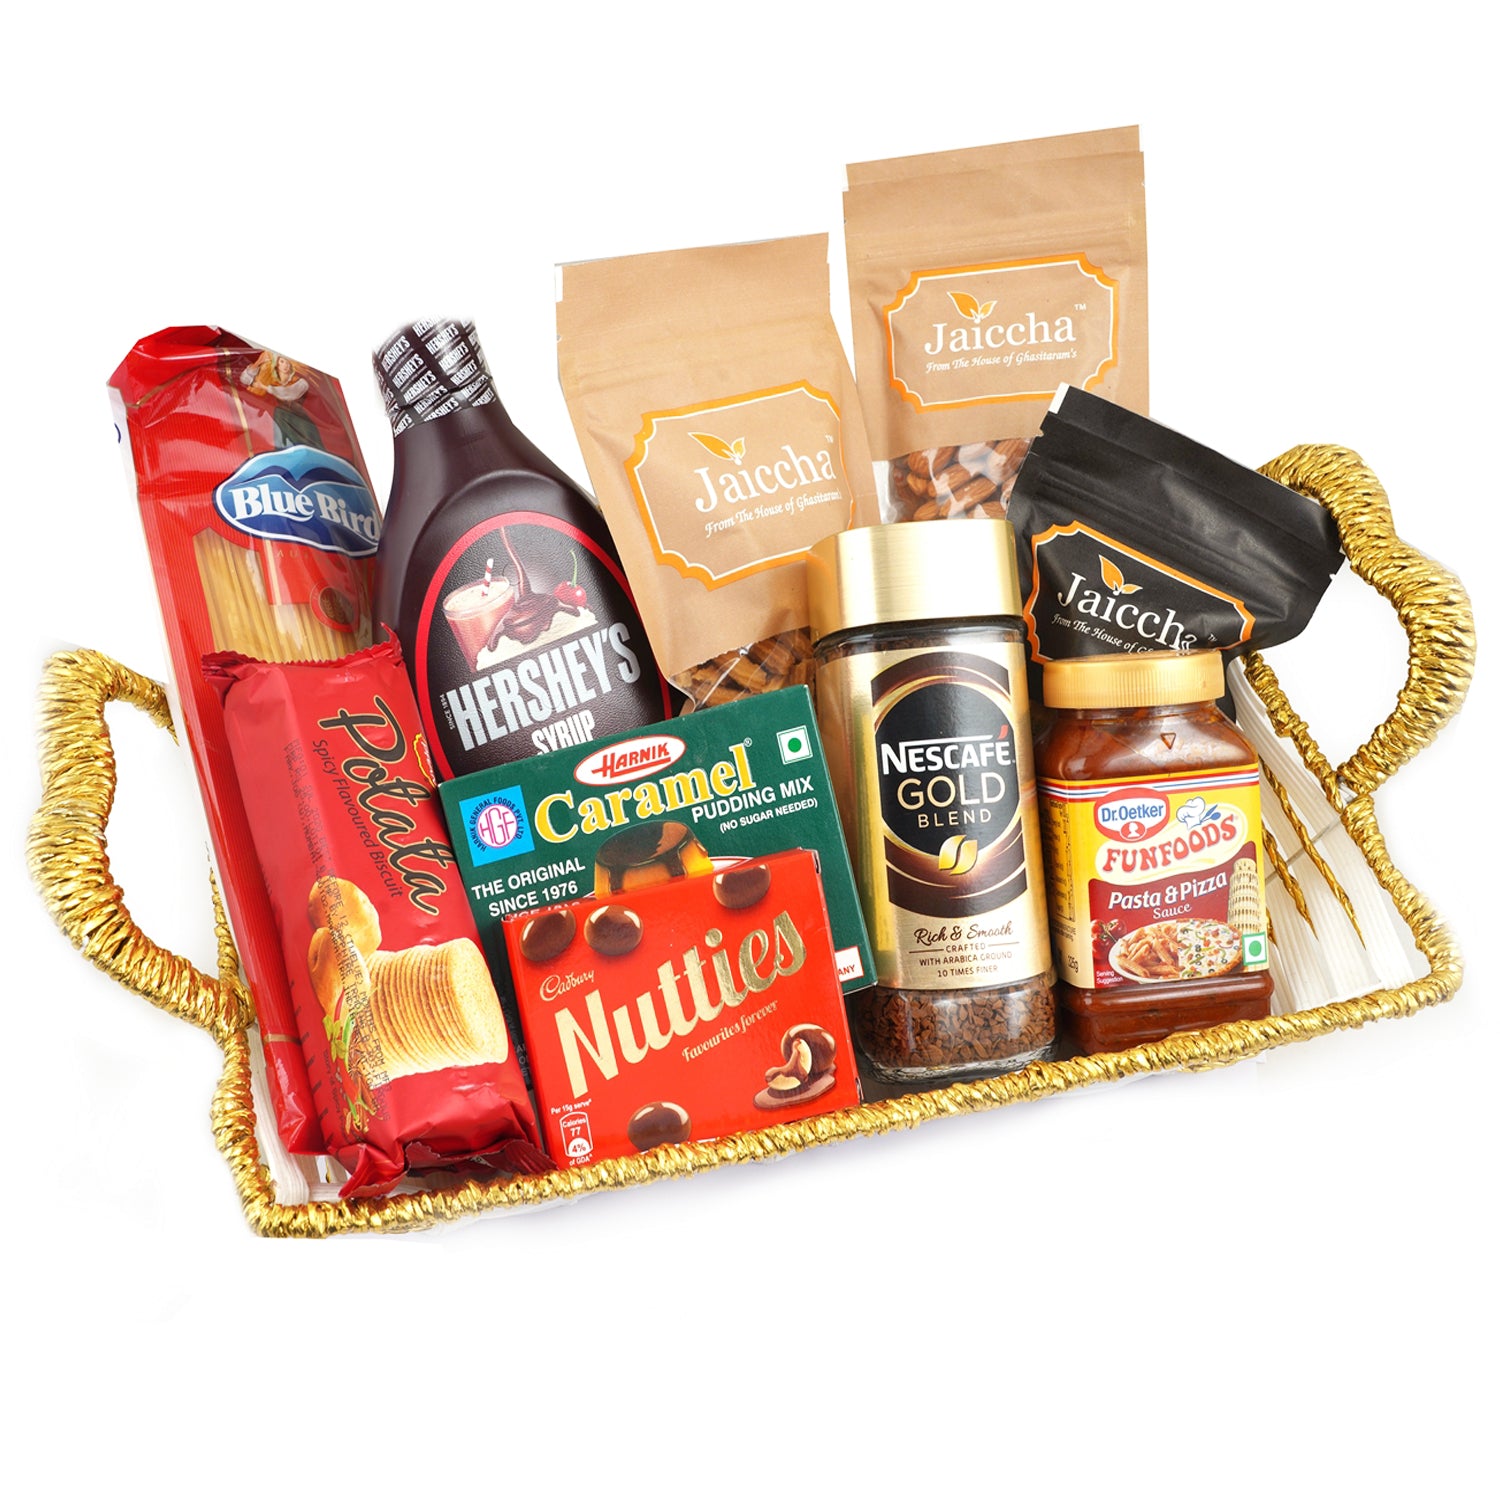 6 delicious food hampers perfect for the holiday season